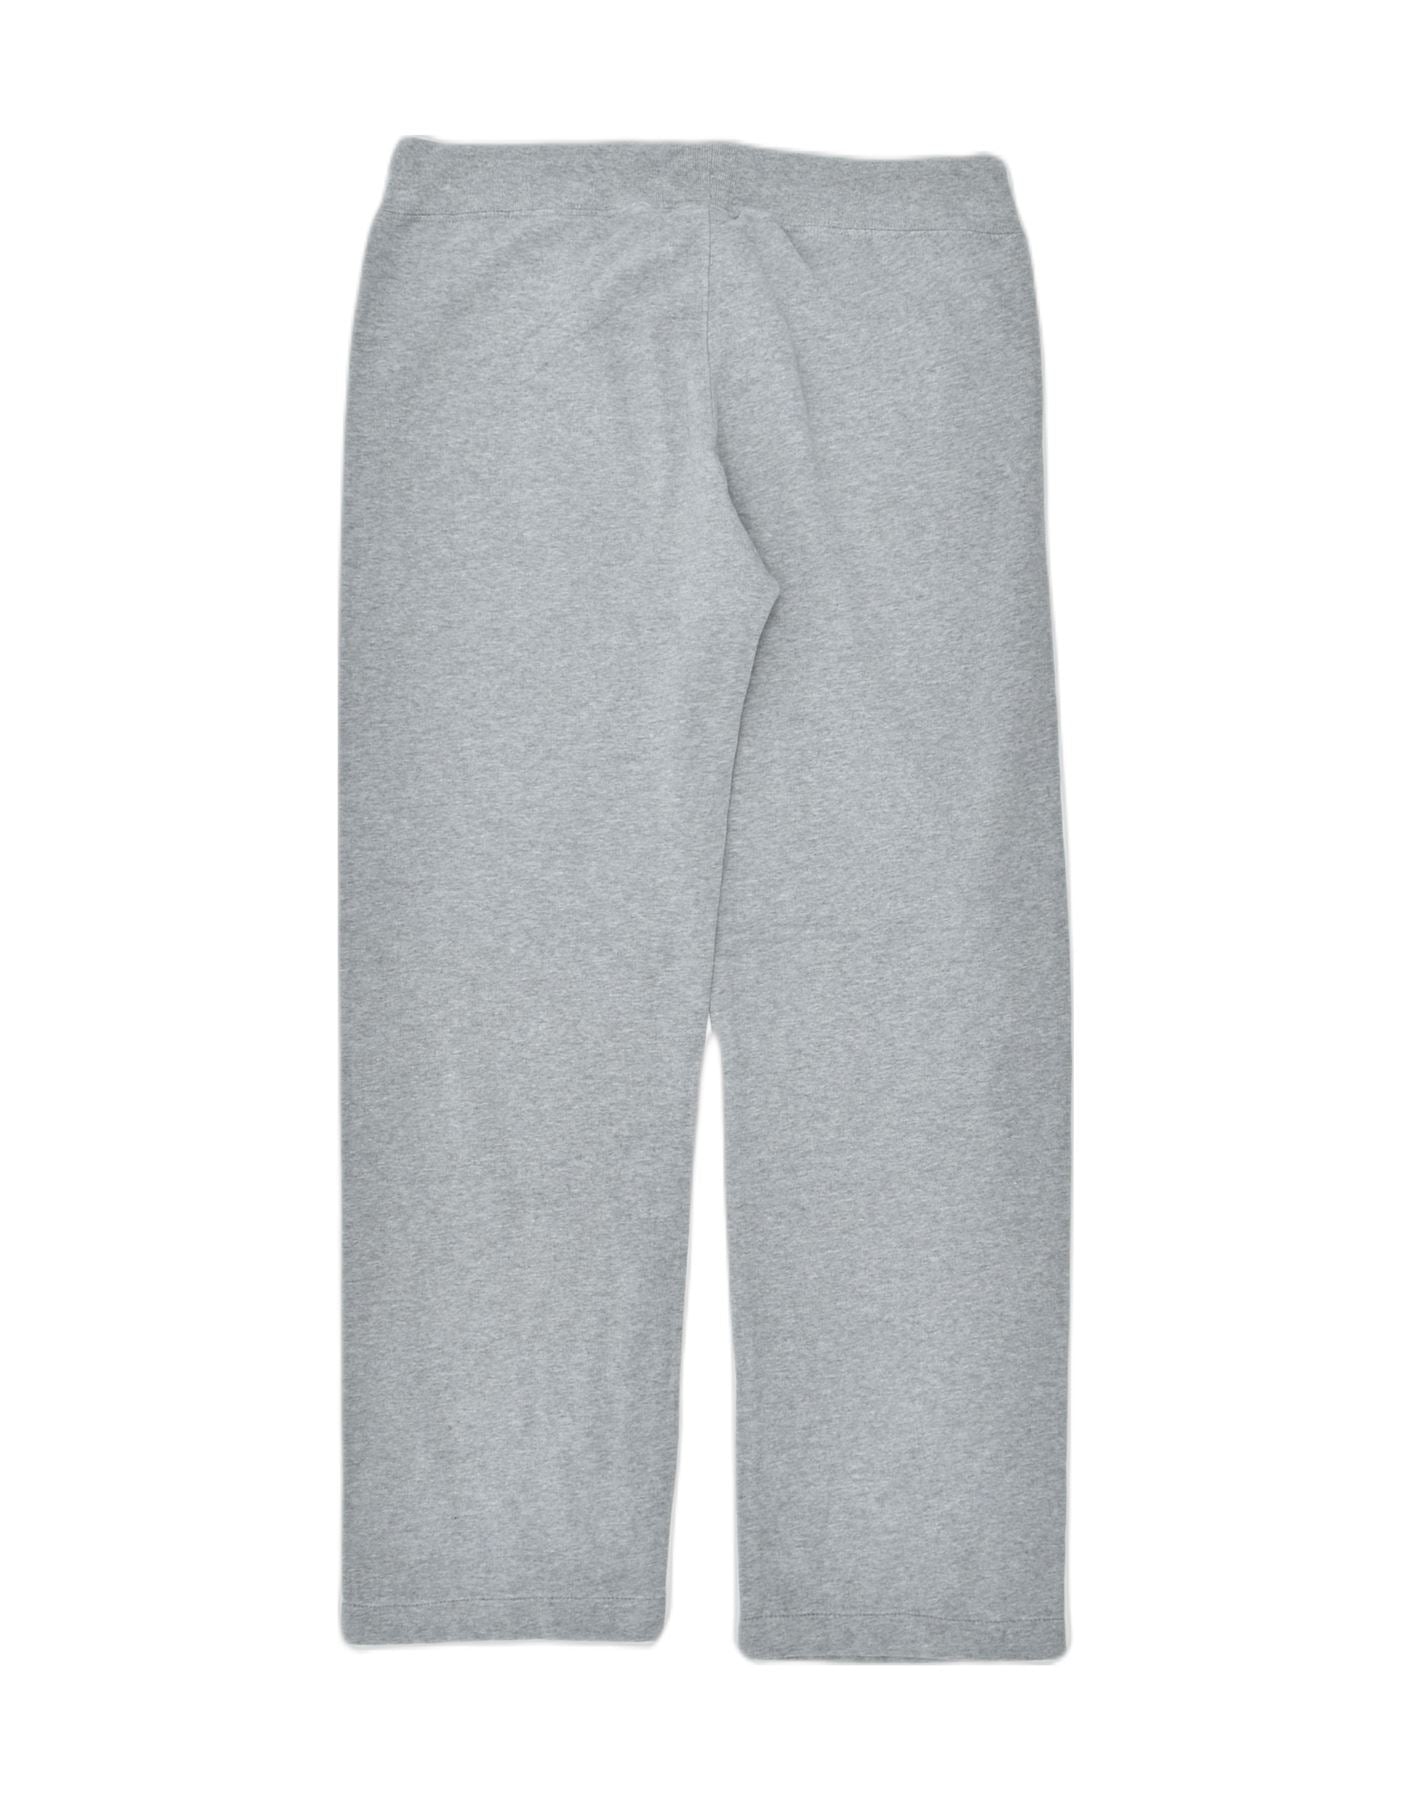 CHAMPION Womens Tracksuit Trousers XL Grey Cotton, Vintage & Second-Hand  Clothing Online